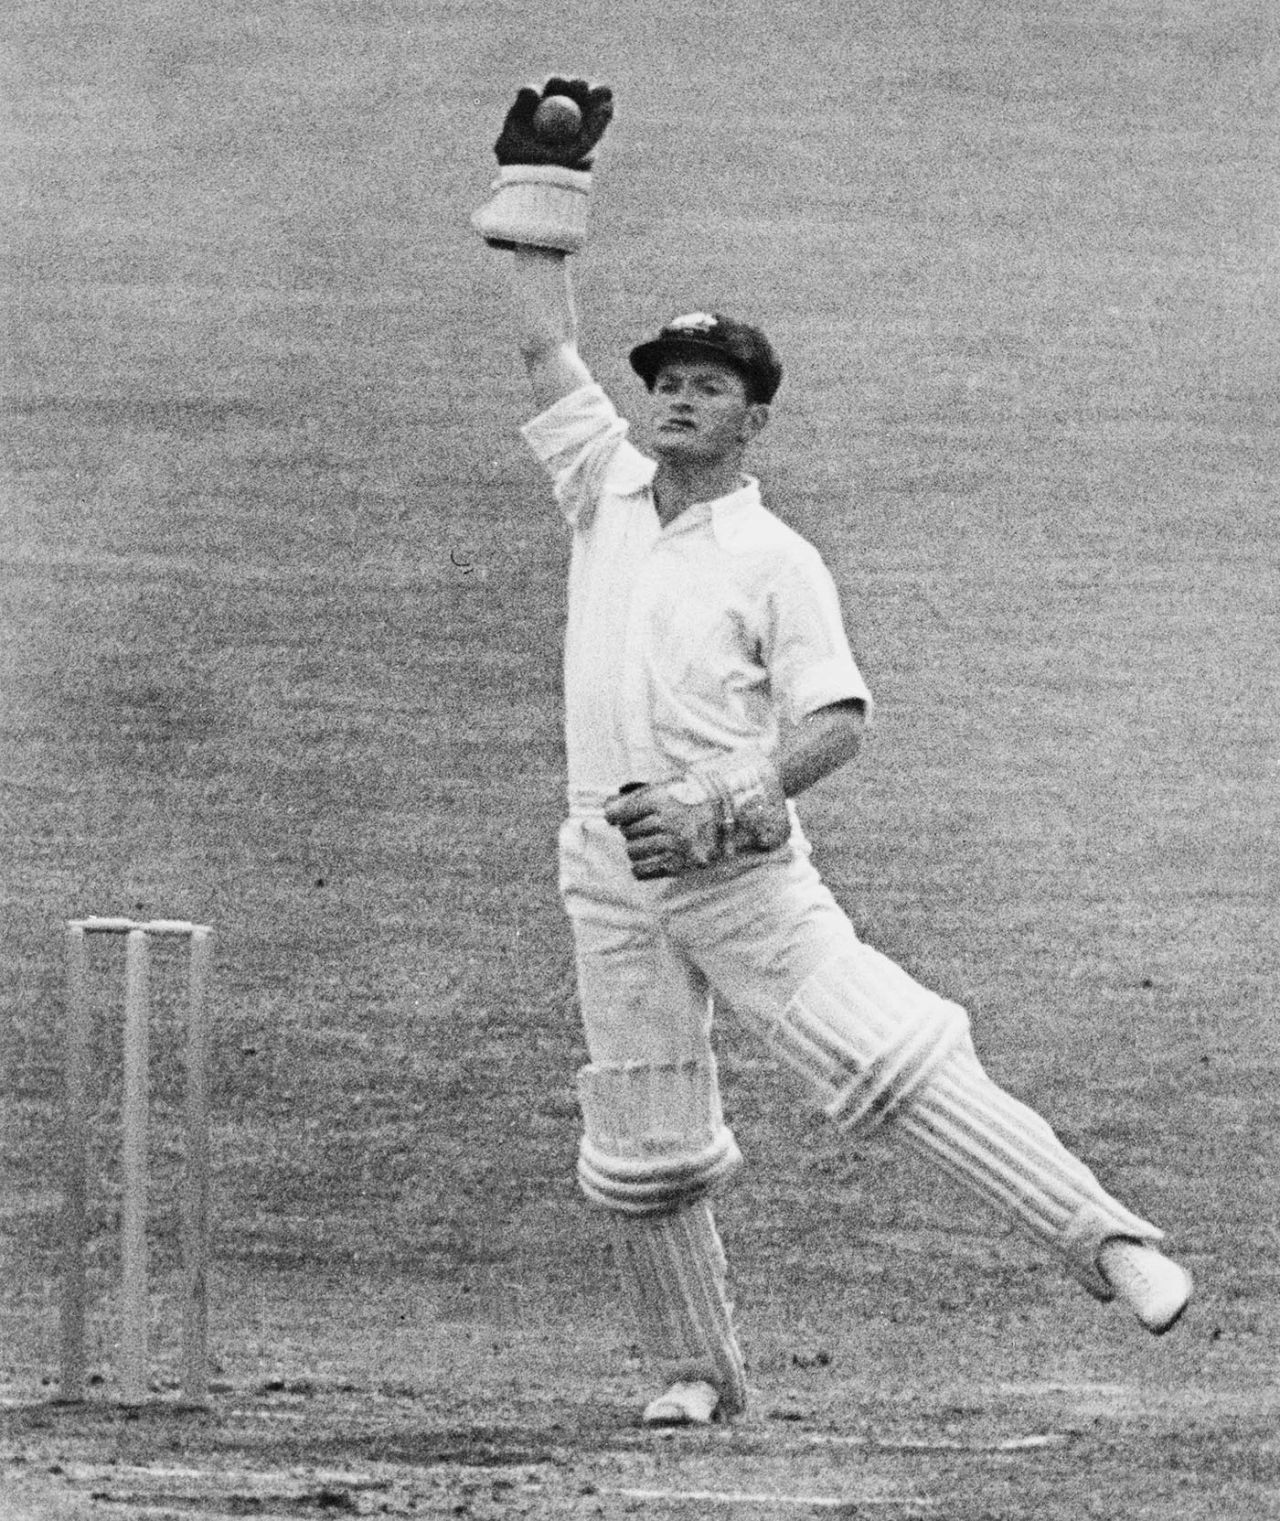 Len Maddocks catches the ball, Surrey v Australians, tour match, The Oval, 17 May 1956